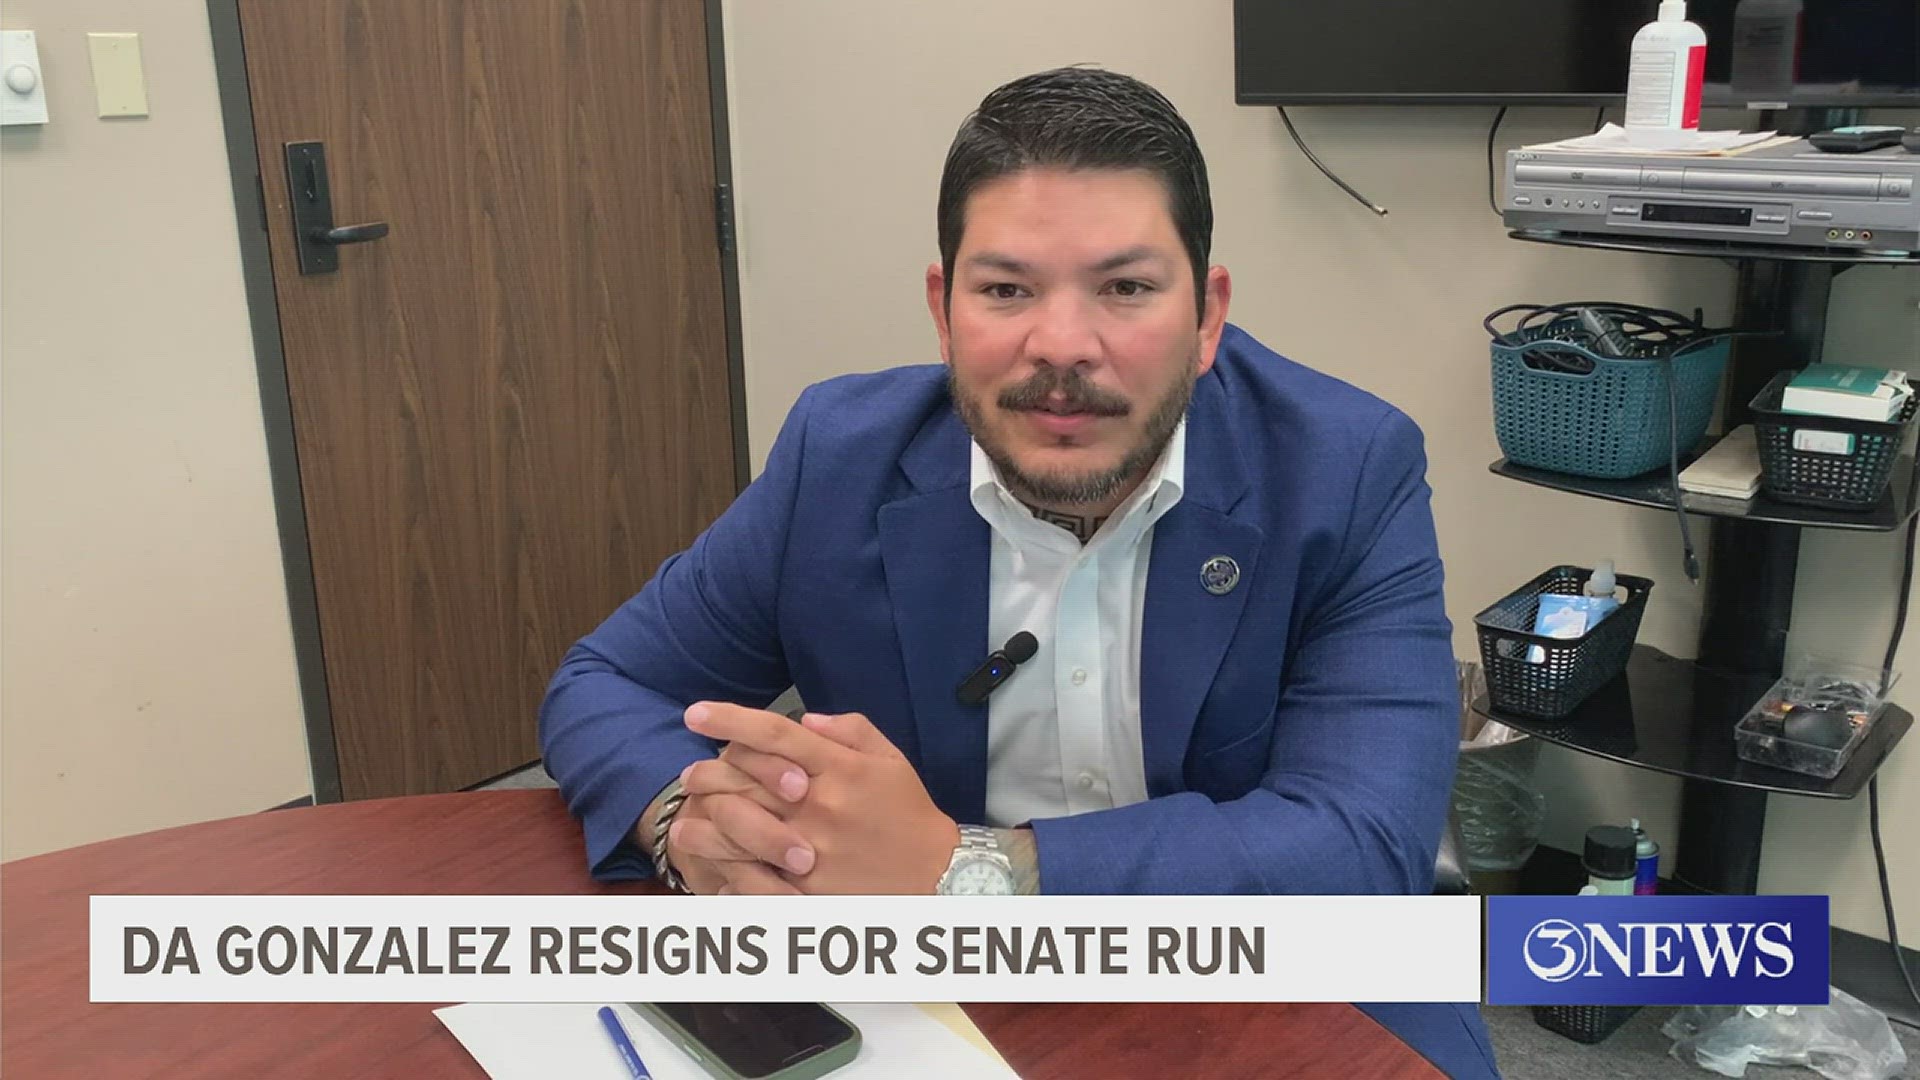 Nueces County District Attorney Mark Gonzalez confirmed his resignation to 3NEWS Tuesday morning.